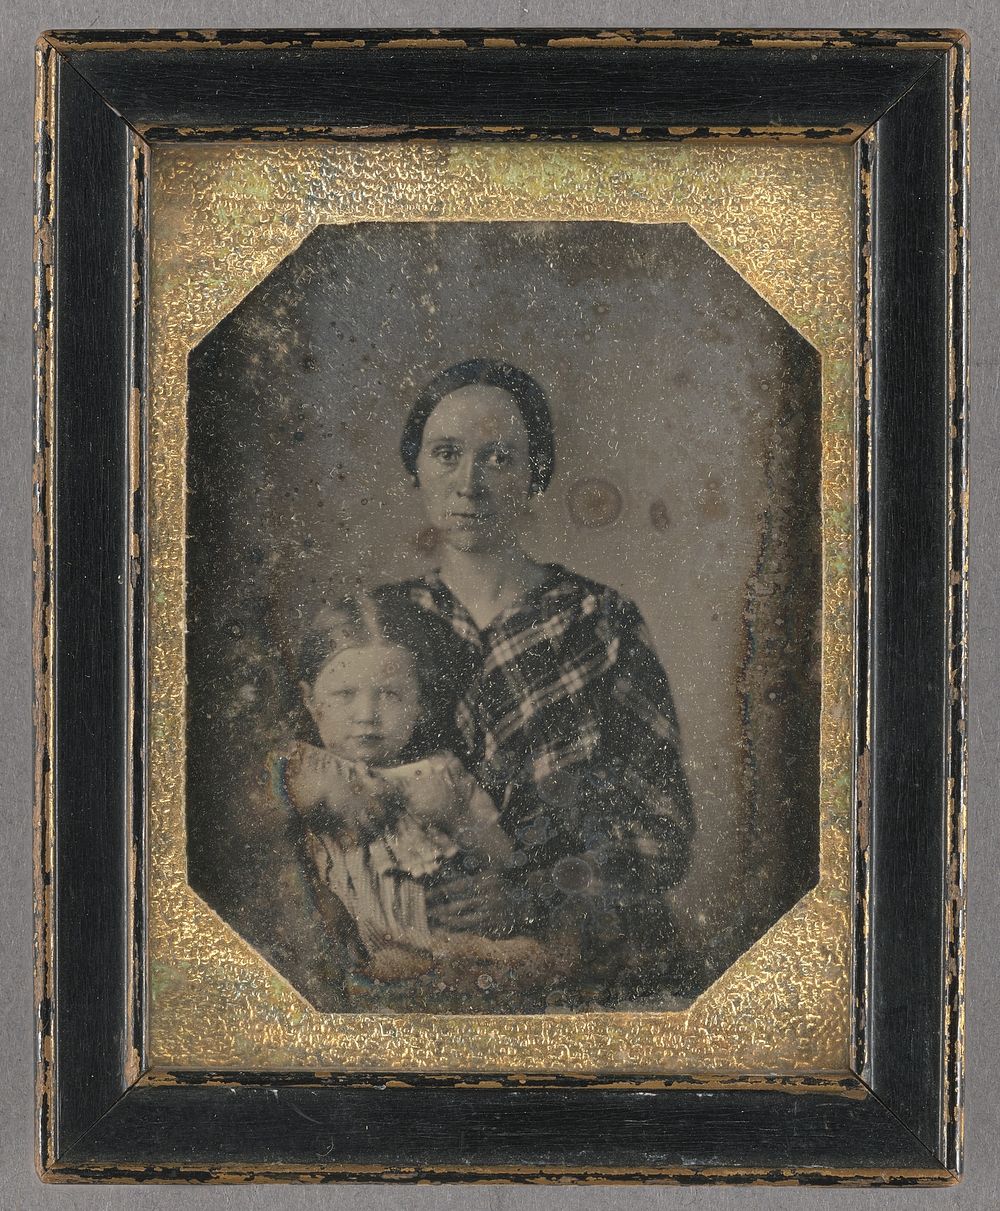 Portrait of a Woman and Child] / [Grammie and Hester